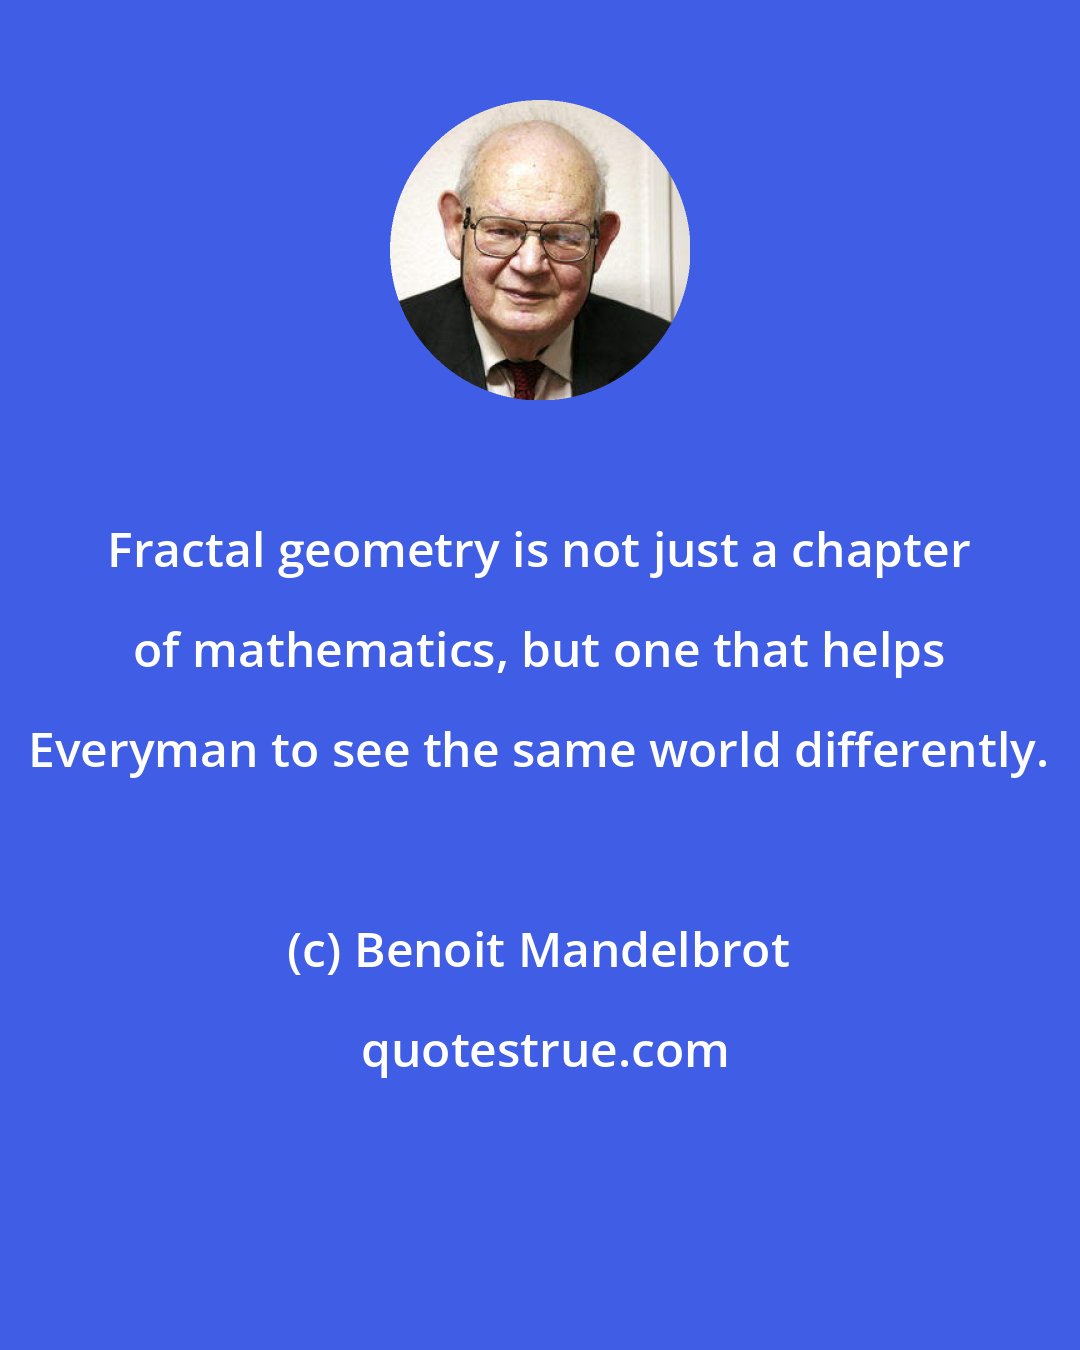 Benoit Mandelbrot: Fractal geometry is not just a chapter of mathematics, but one that helps Everyman to see the same world differently.